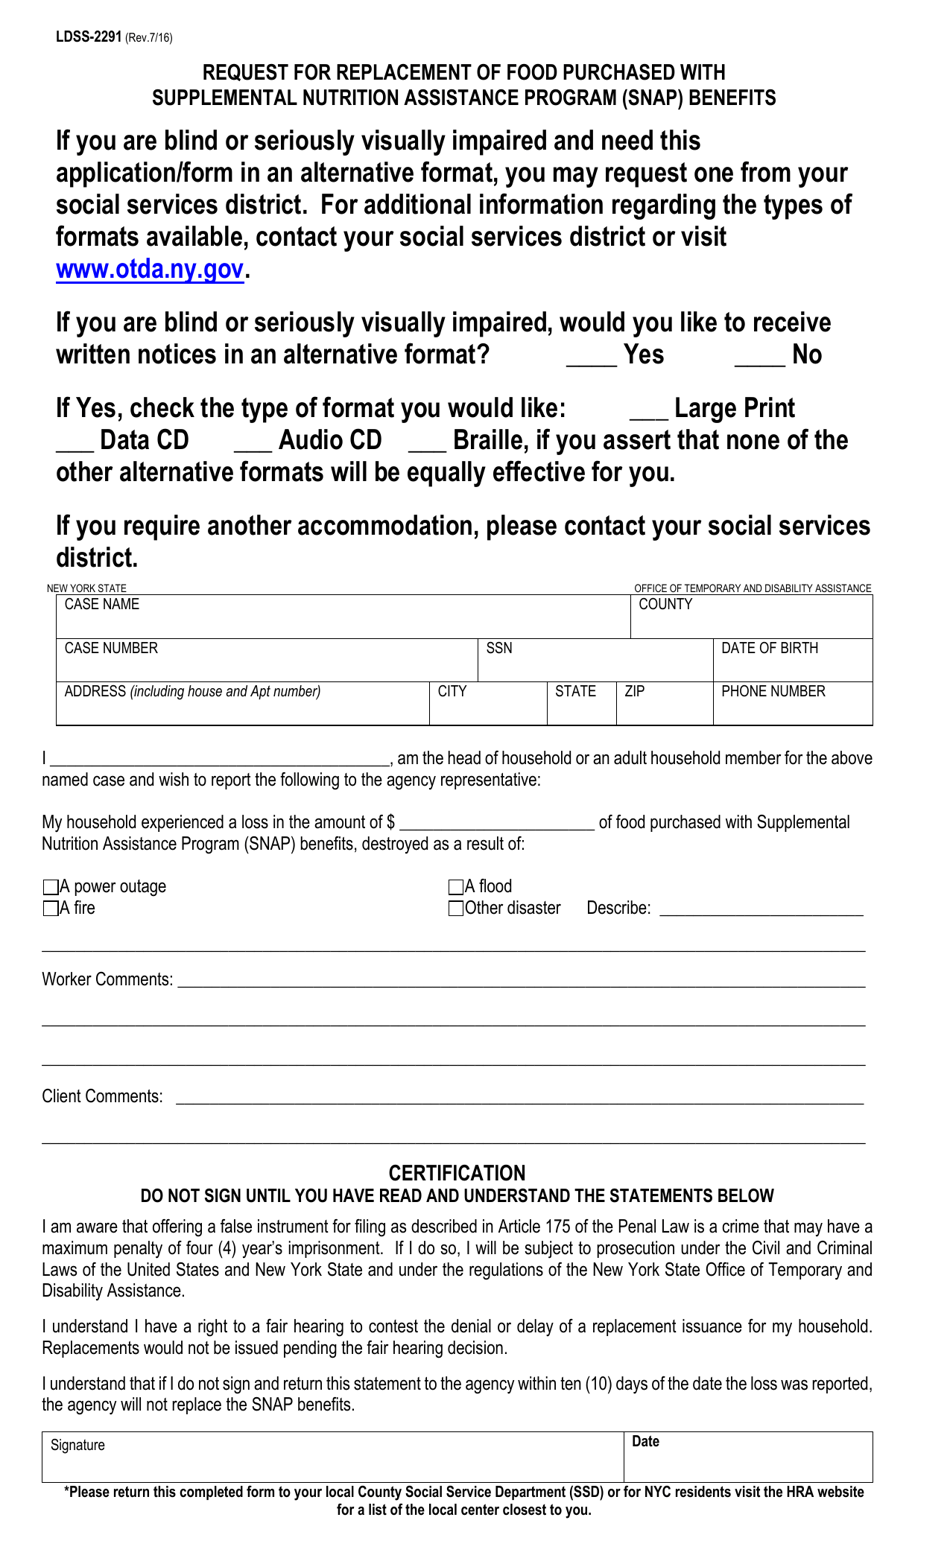 Form LDSS-2291 Request for Replacement of Food Purchased With Supplemental Nutrition Assistance Program (Snap) Benefits - New York (English / Yiddish), Page 1